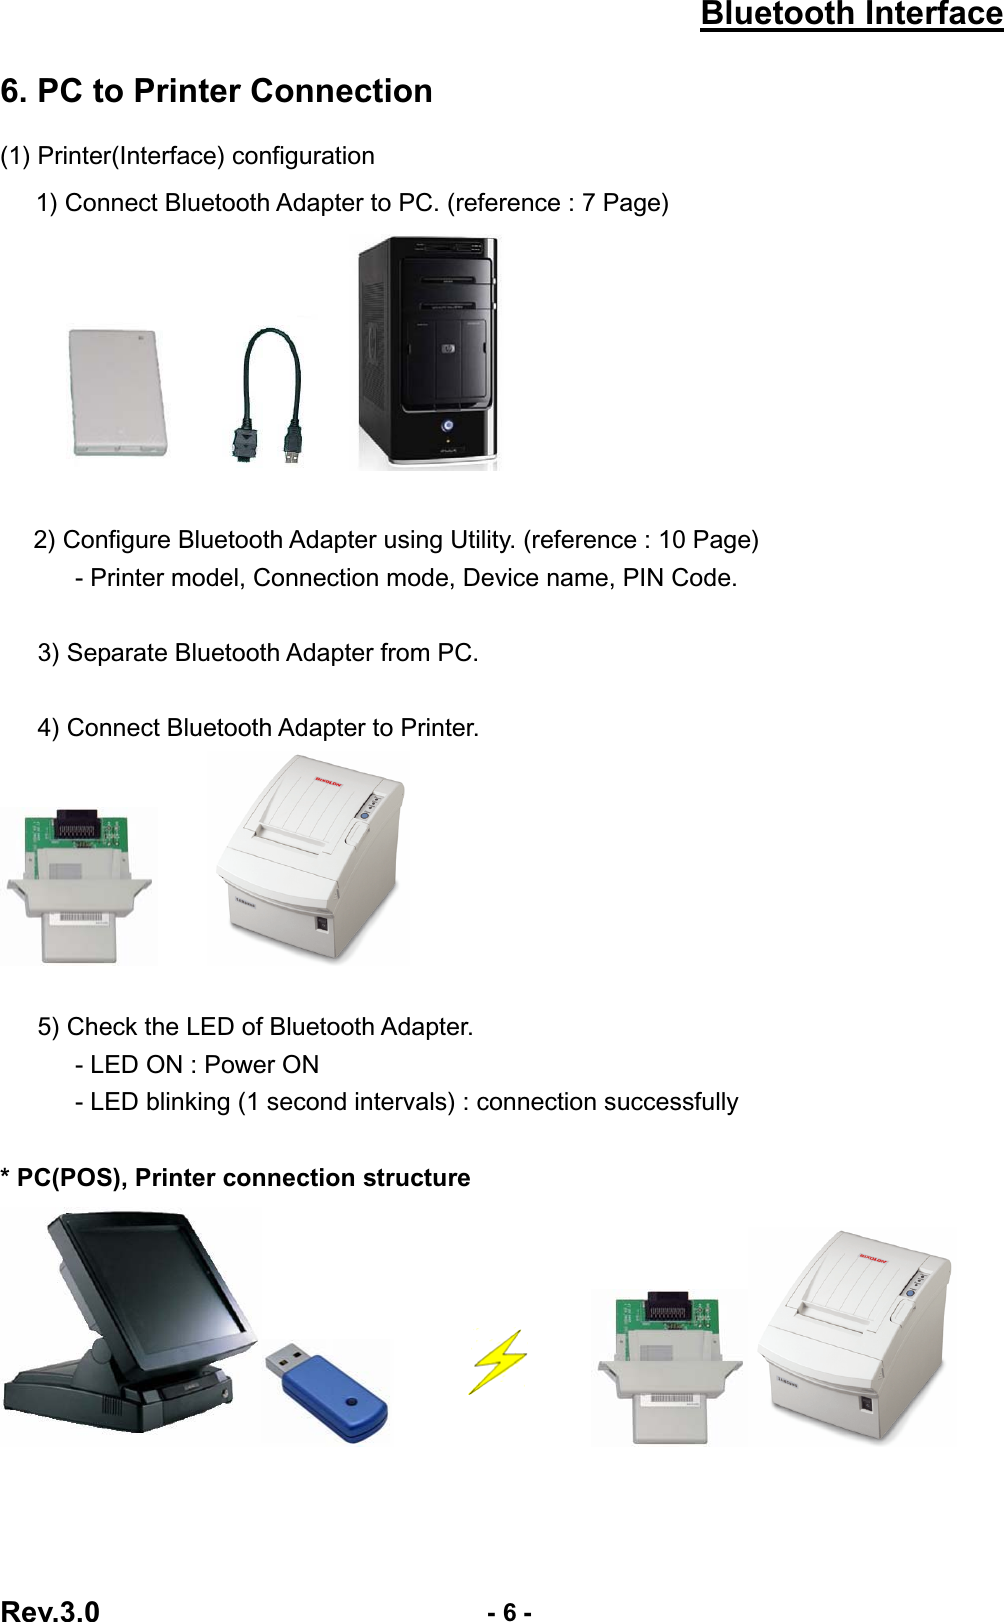 Bluetooth InterfaceRev.3.0  - 6 -6. PC to Printer Connection (1) Printer(Interface) configuration ٻ    1) Connect Bluetooth Adapter to PC. (reference : 7 Page)       ٻٻٻٻ  2) Configure Bluetooth Adapter using Utility. (reference : 10 Page)             - Printer model, Connection mode, Device name, PIN Code.       3) Separate Bluetooth Adapter from PC.       4) Connect Bluetooth Adapter to Printer.       5) Check the LED of Bluetooth Adapter. - LED ON : Power ON             - LED blinking (1 second intervals) : connection successfully   * PC(POS), Printer connection structure ٻٻٻٻٻٻٻٻٻٻٻٻٻٻٻٻٻٻٻ ٻ